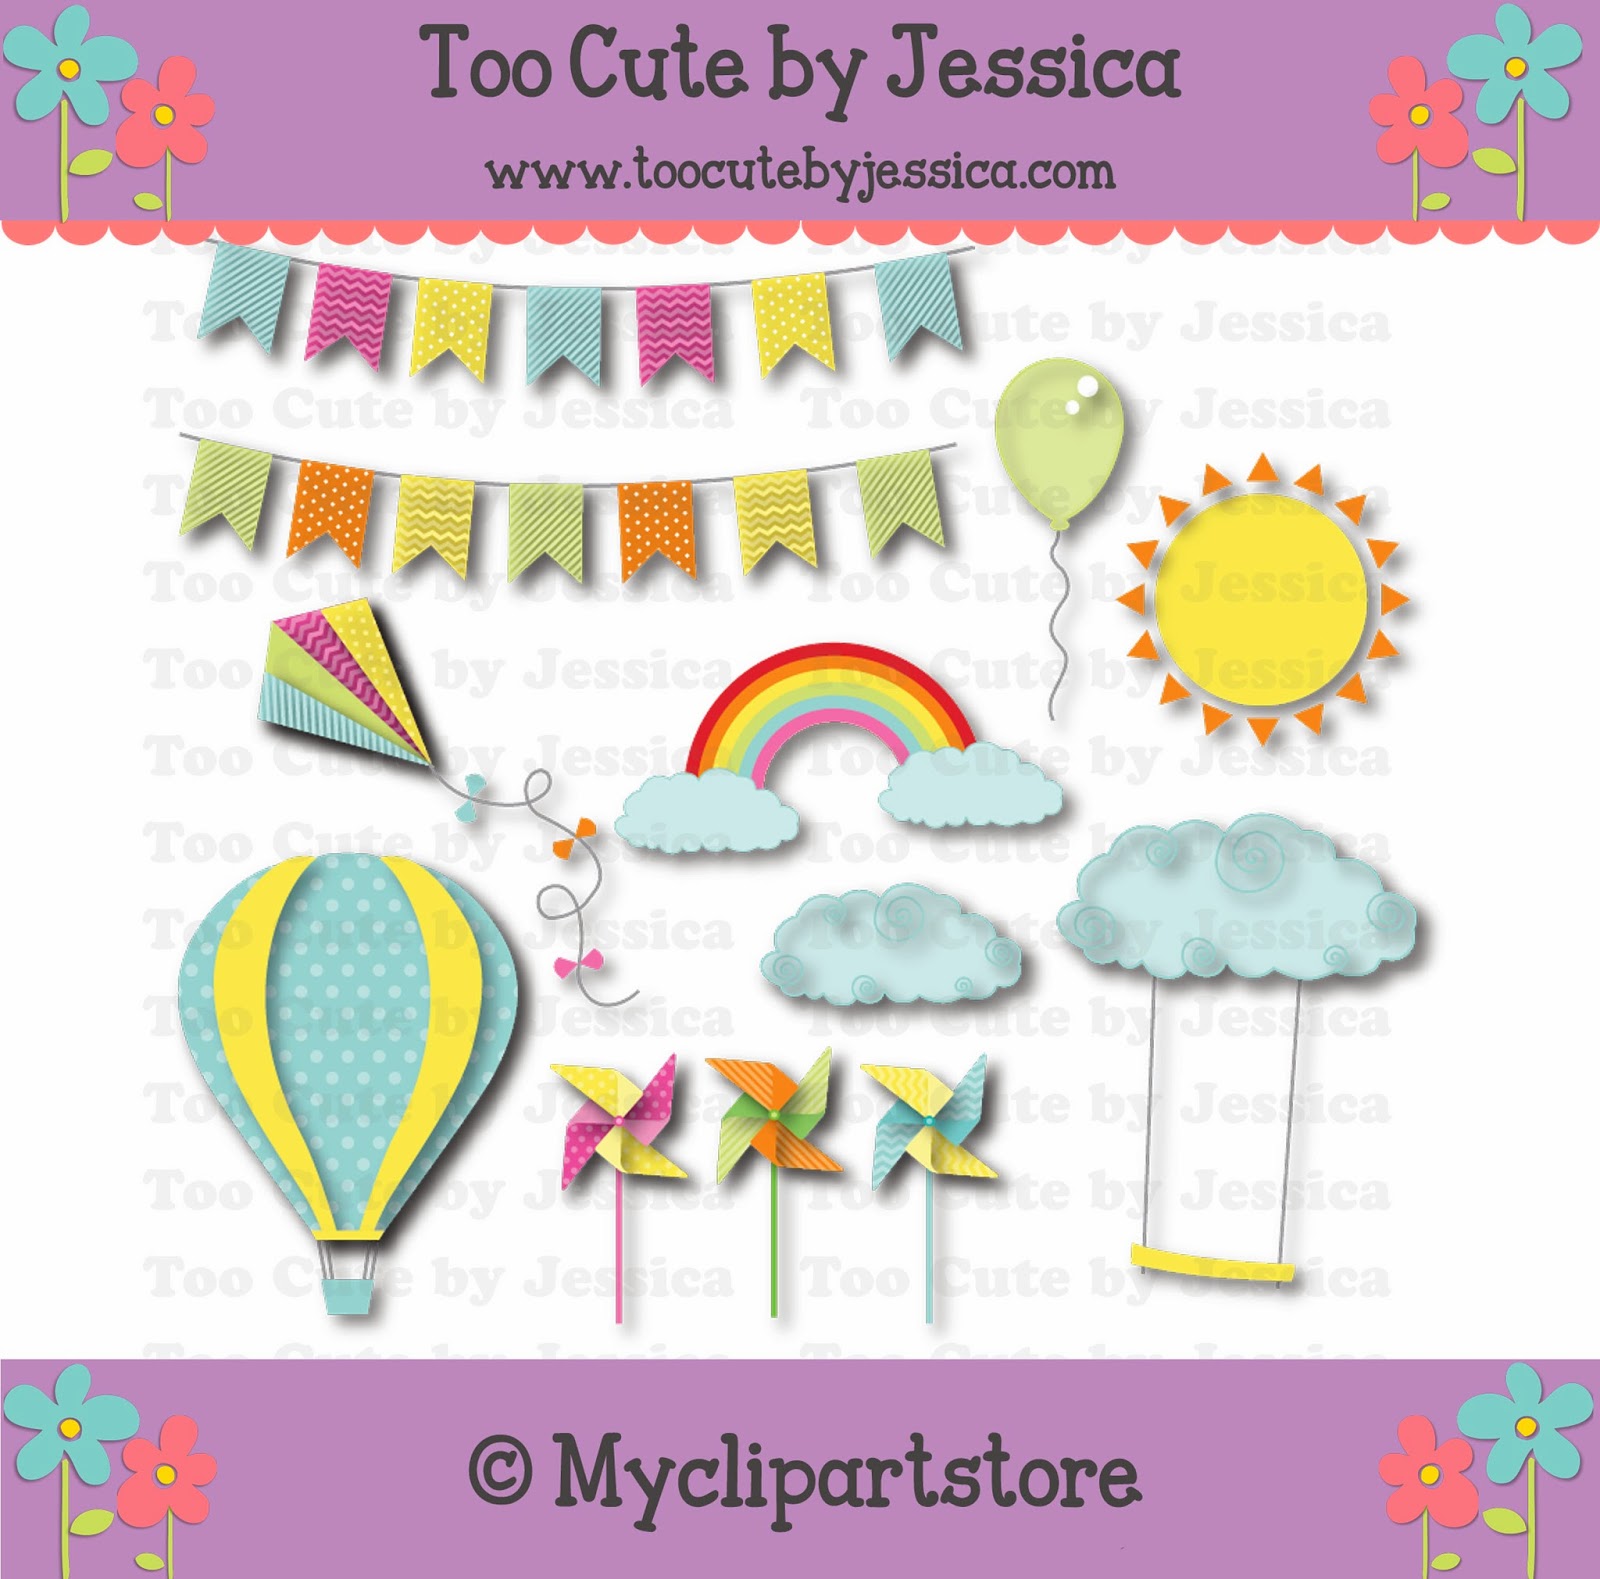 Clipart Can Be Purchased From Myclipartstore